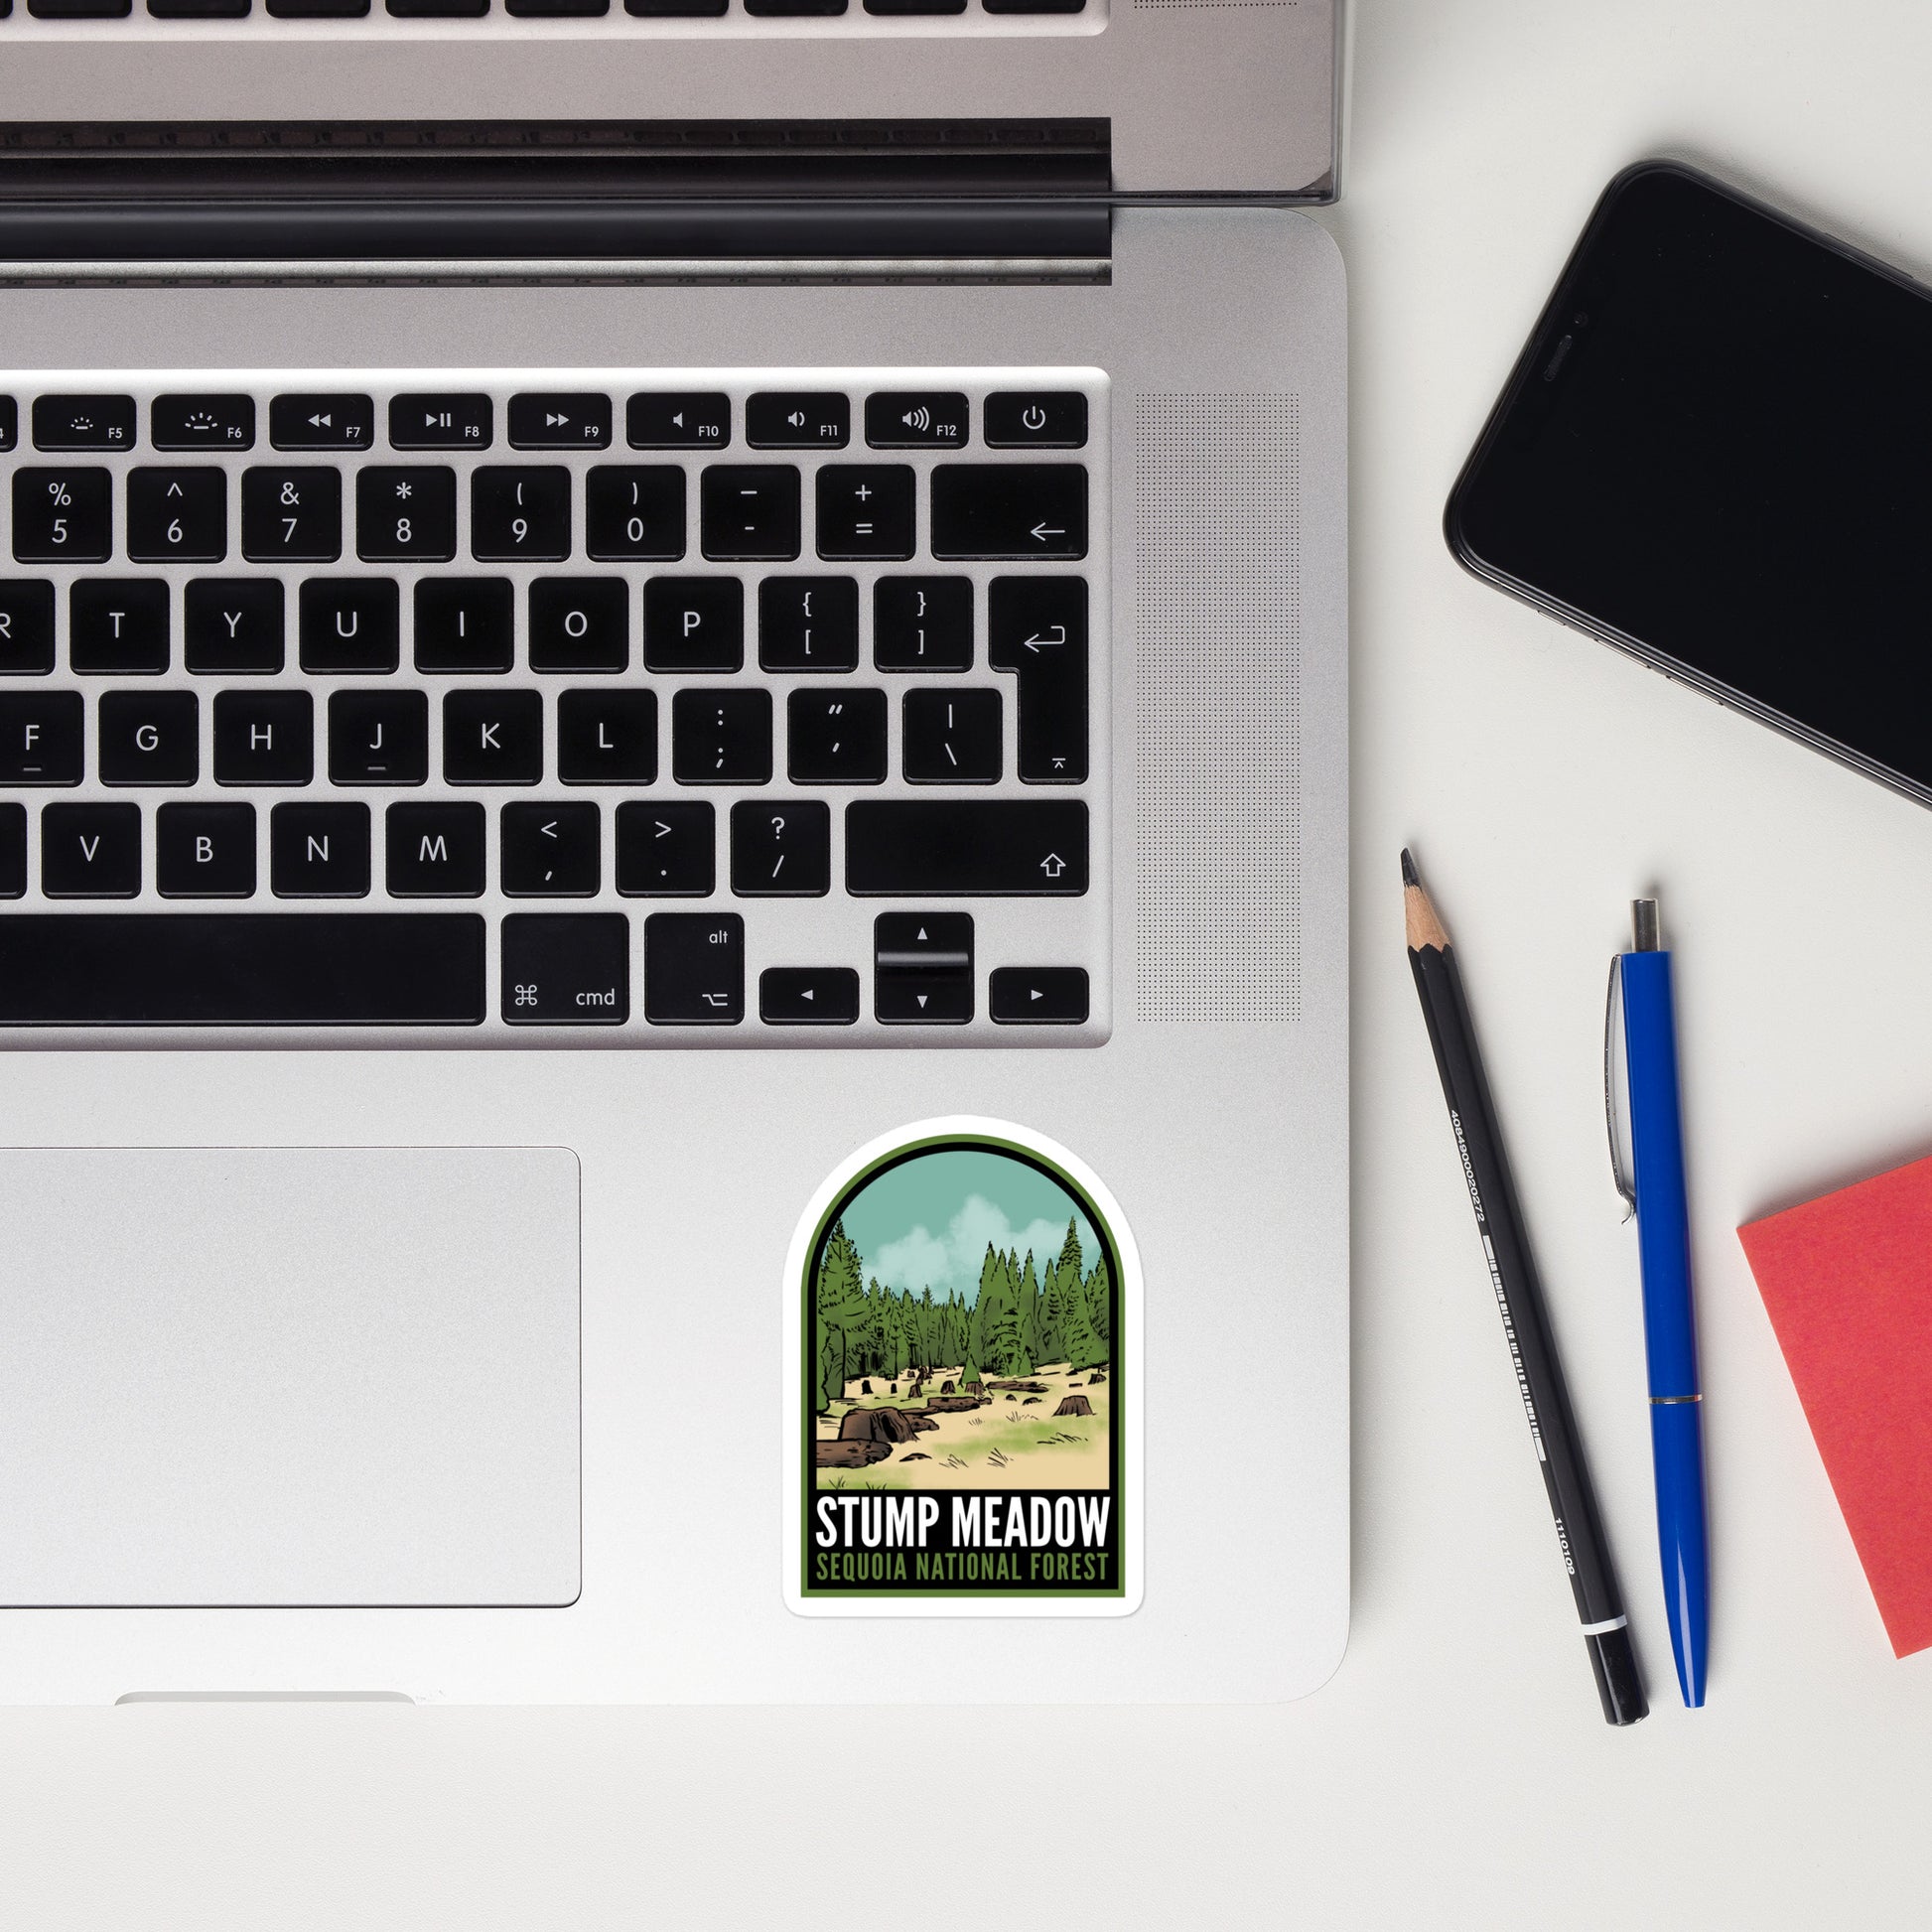 A sticker of Stump Meadow California on a laptop